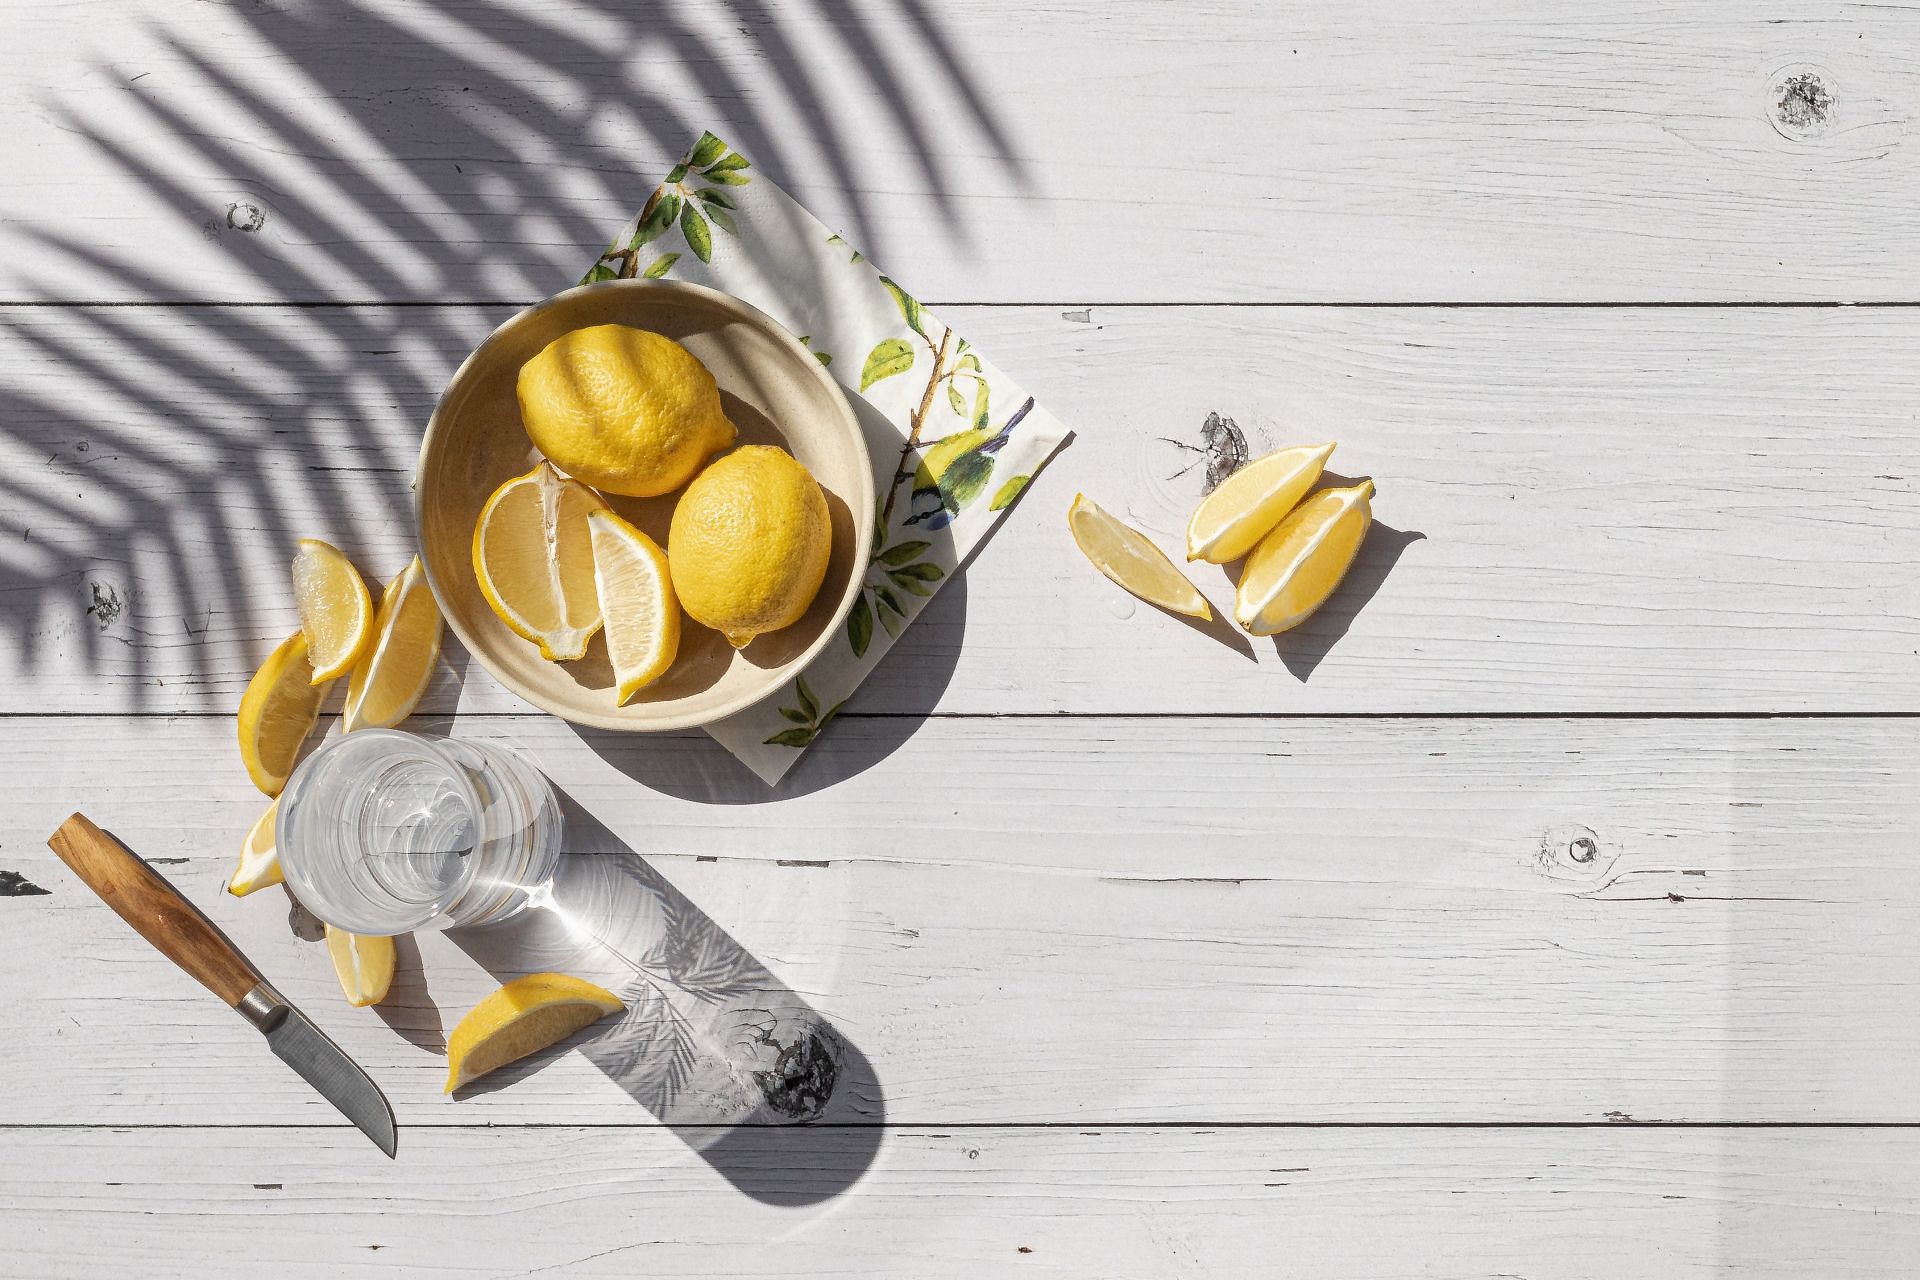 Drinking lemon water may promote healthy weight loss. (Image via Unsplash / Micheile Dot Com) 